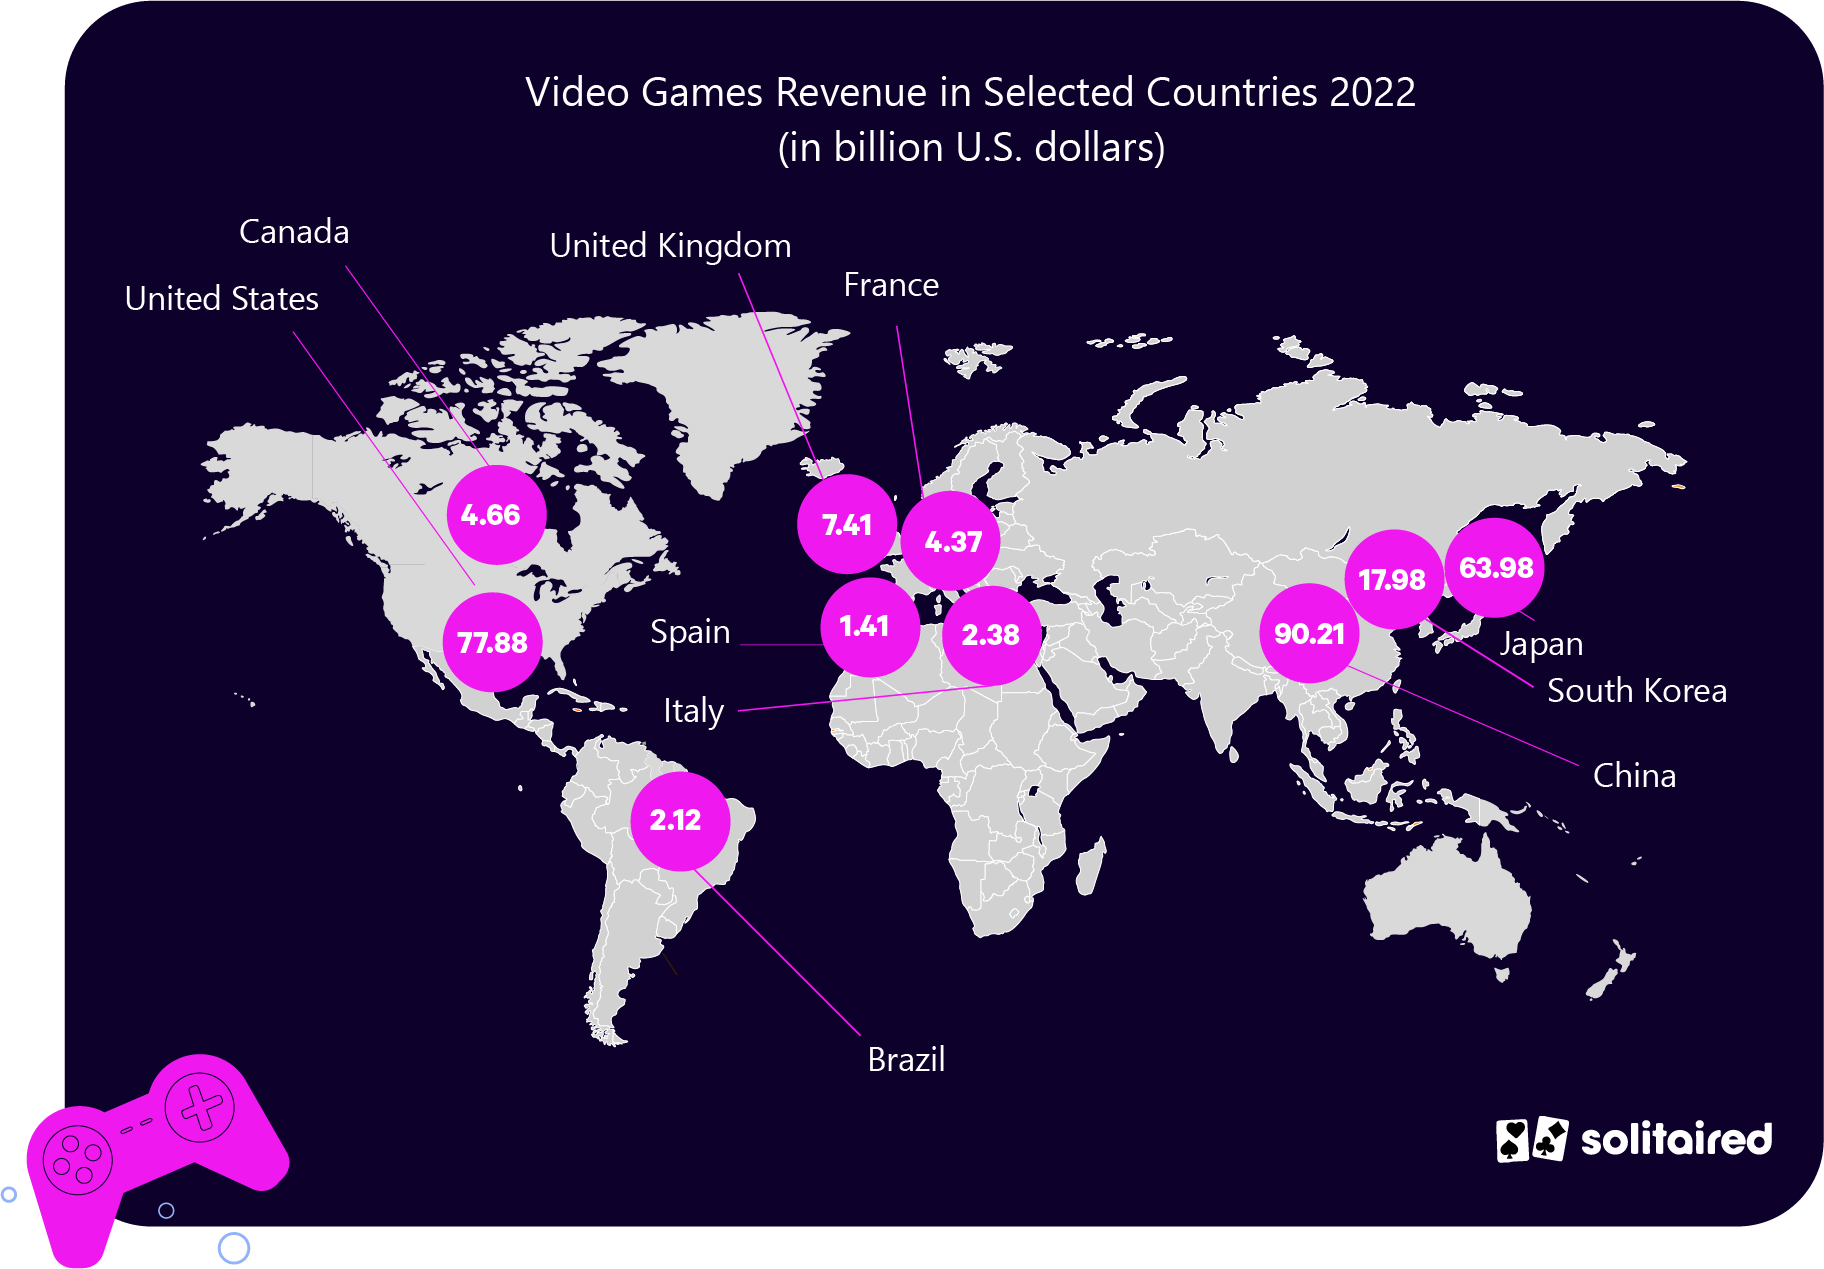 Video game revenue in selected countries